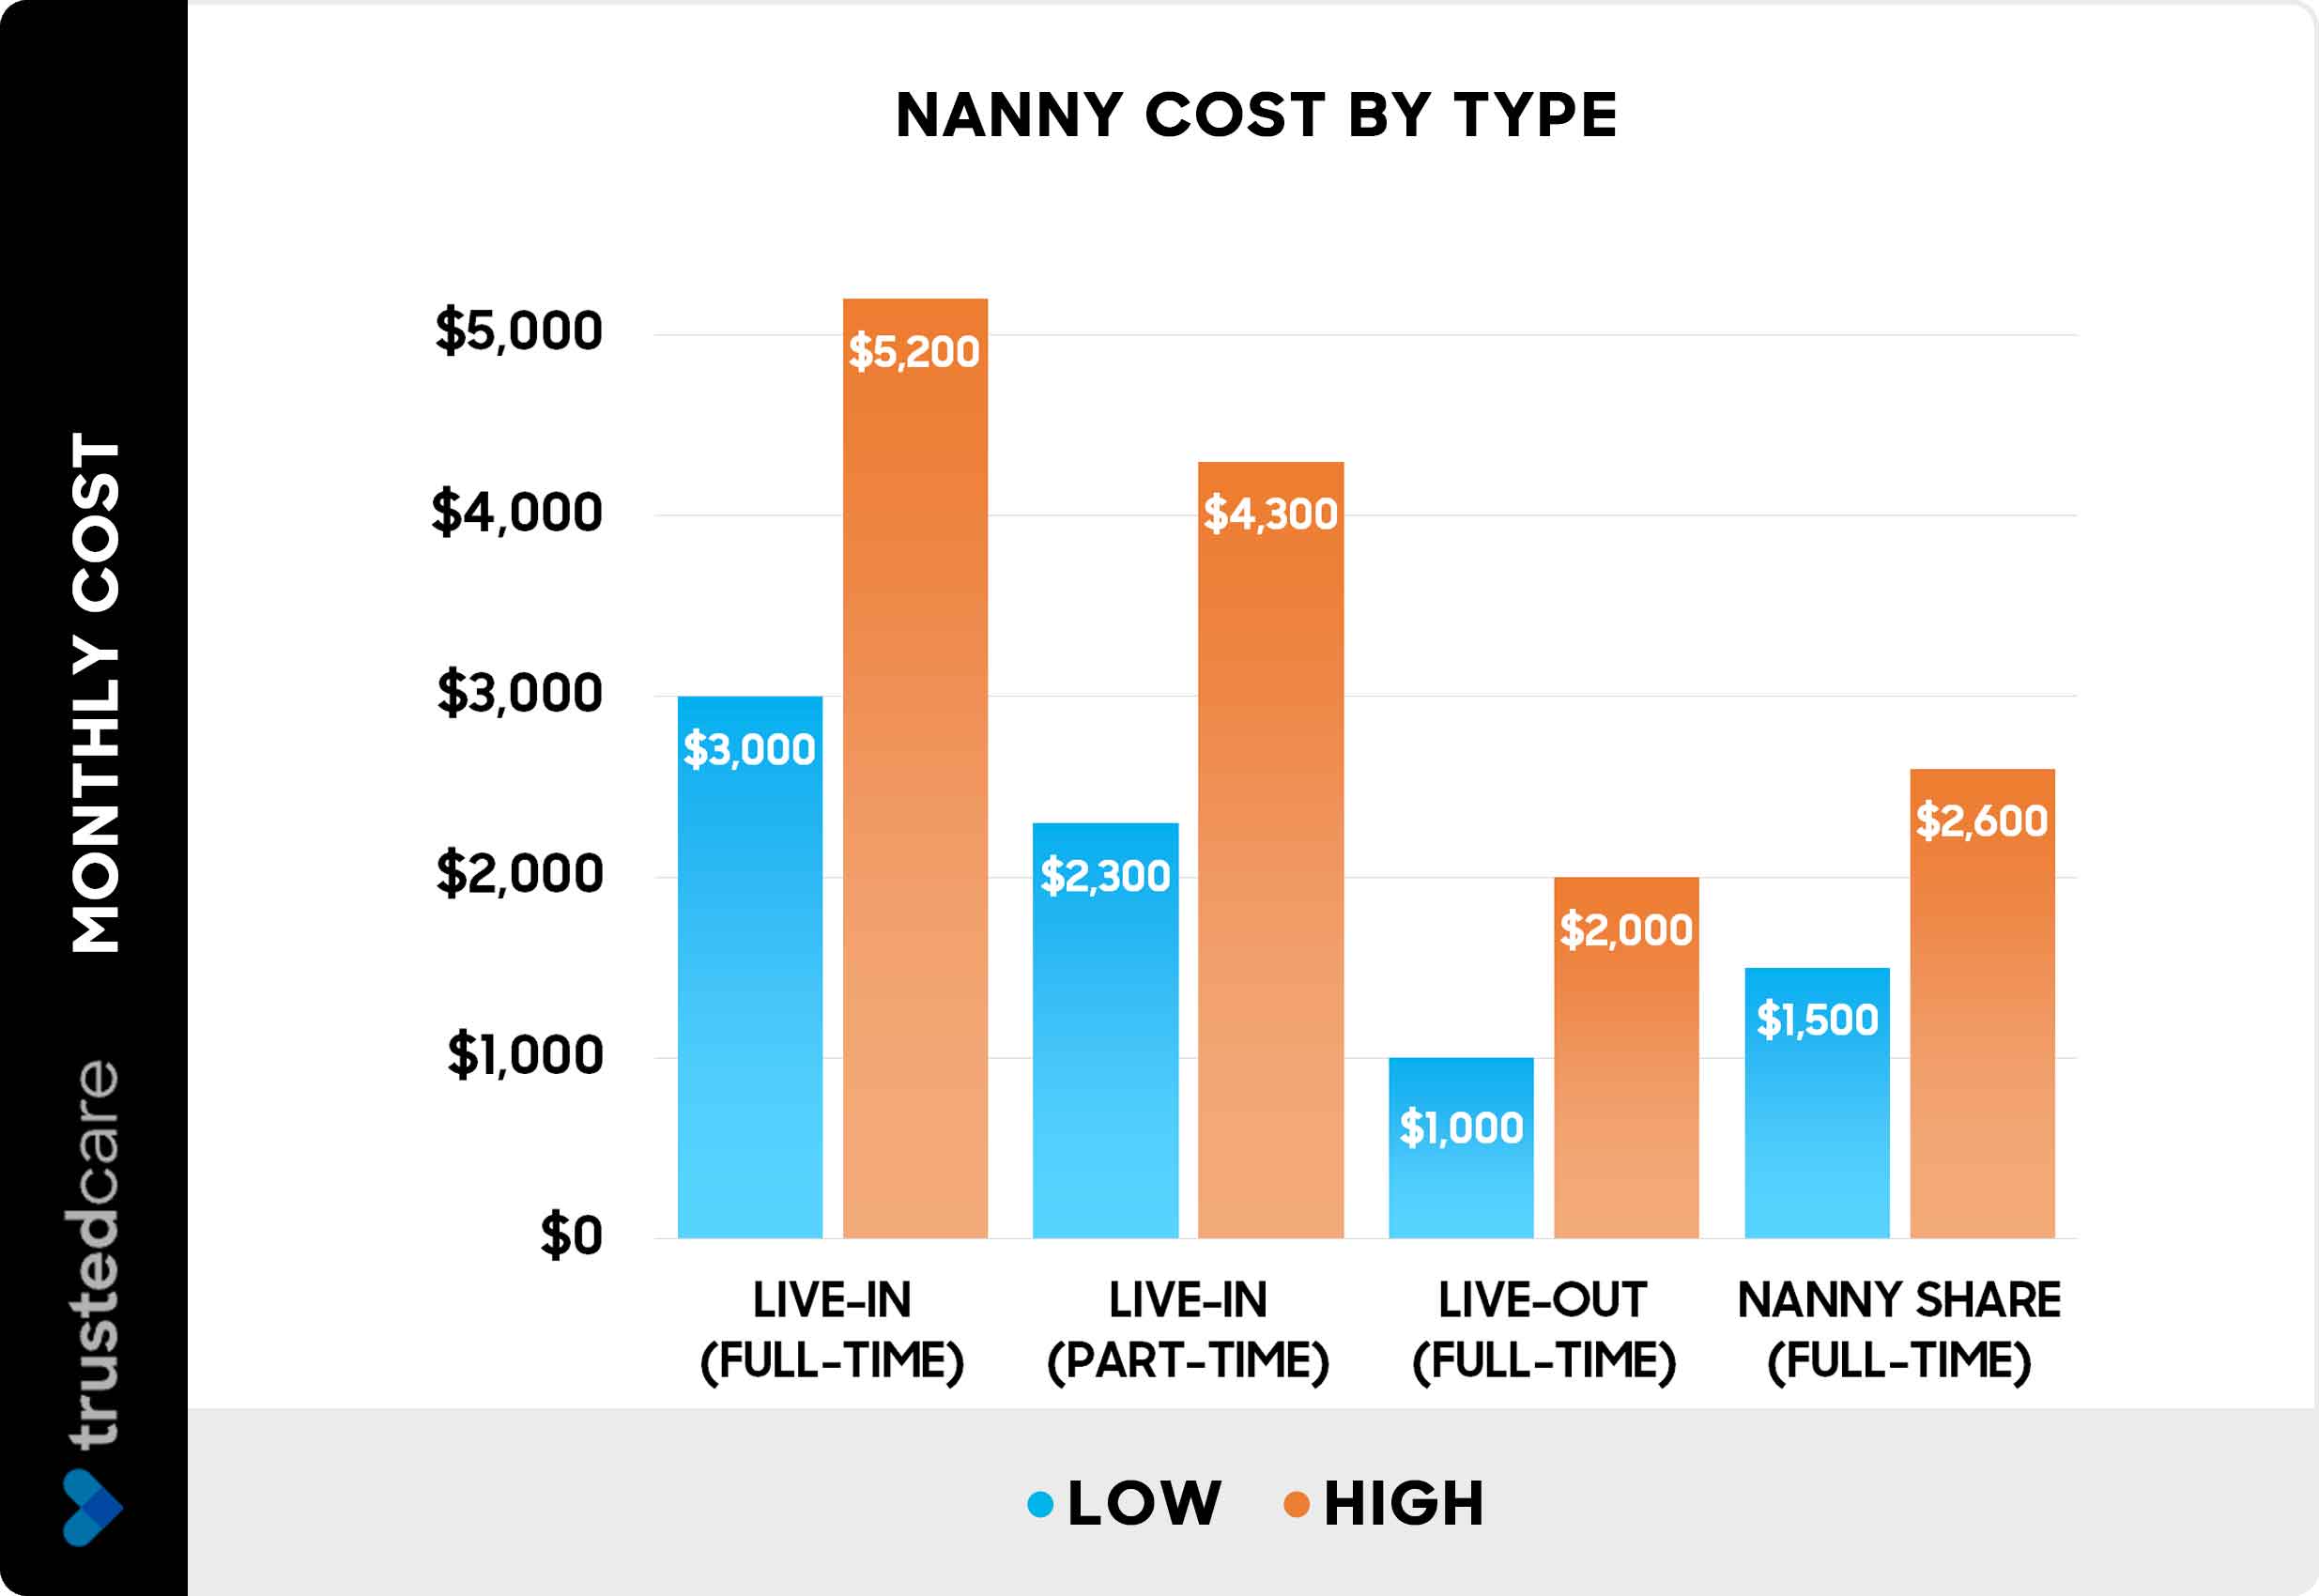 Nanny cost by type - chart